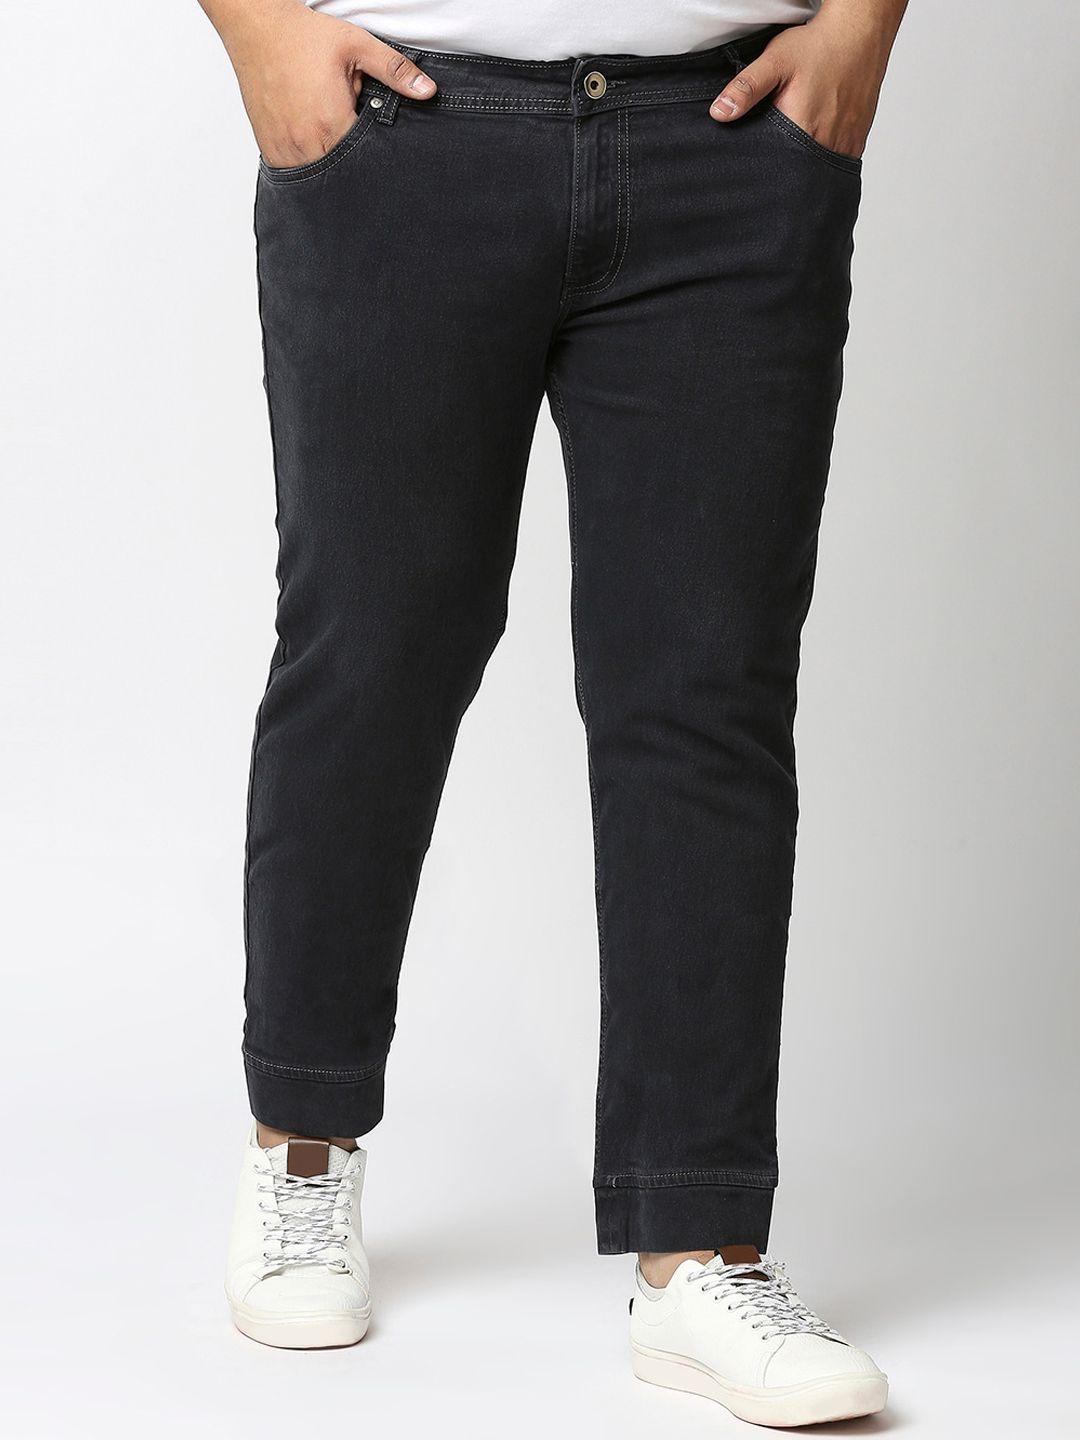 High Star Men Slim Fit Mid-Rise Stretchable Jeans